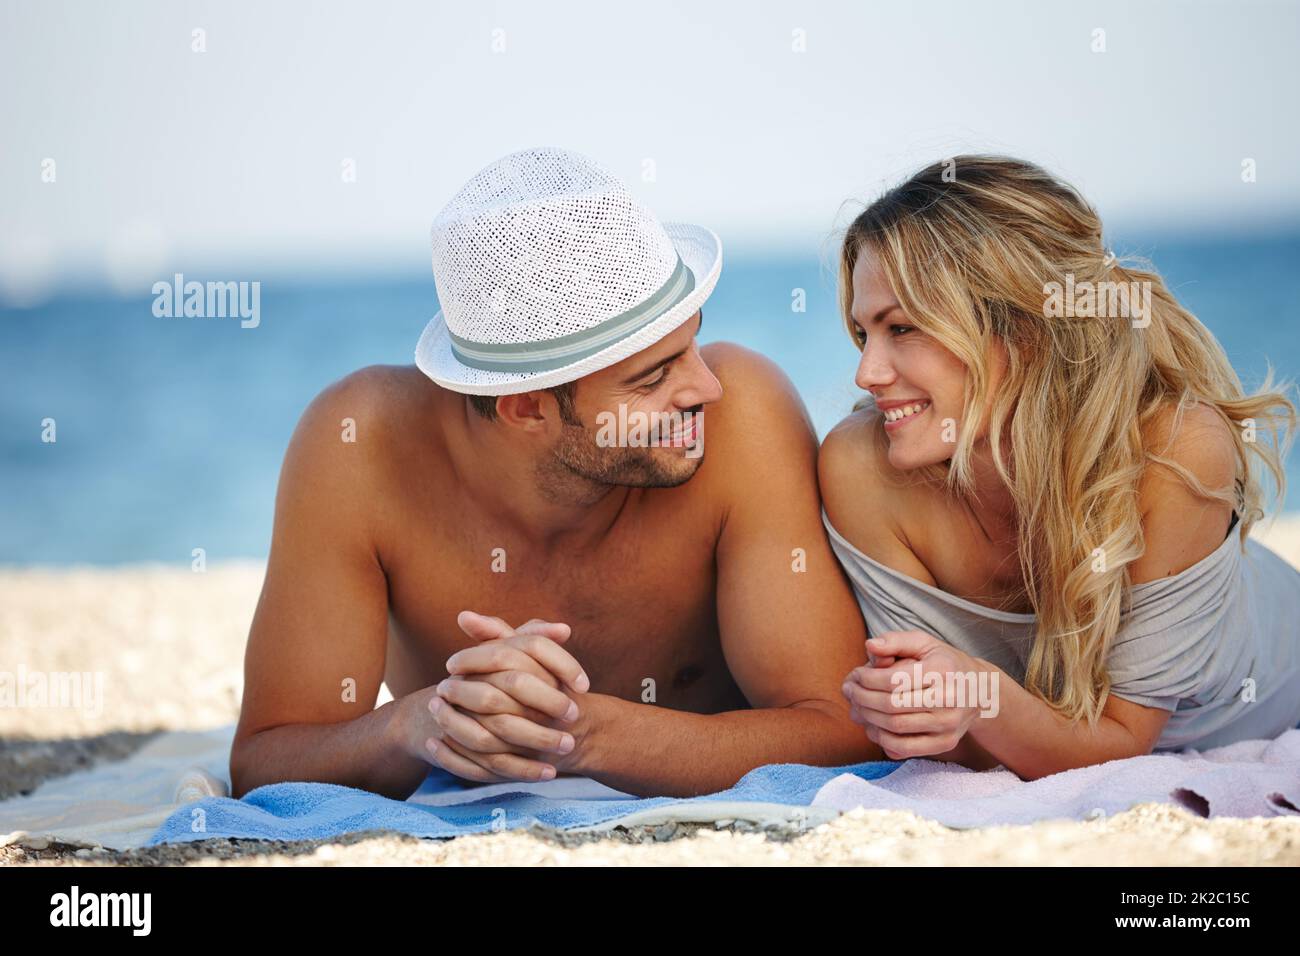 Holiday romance. Shot of a happy young couple lying on the beach. Stock Photo